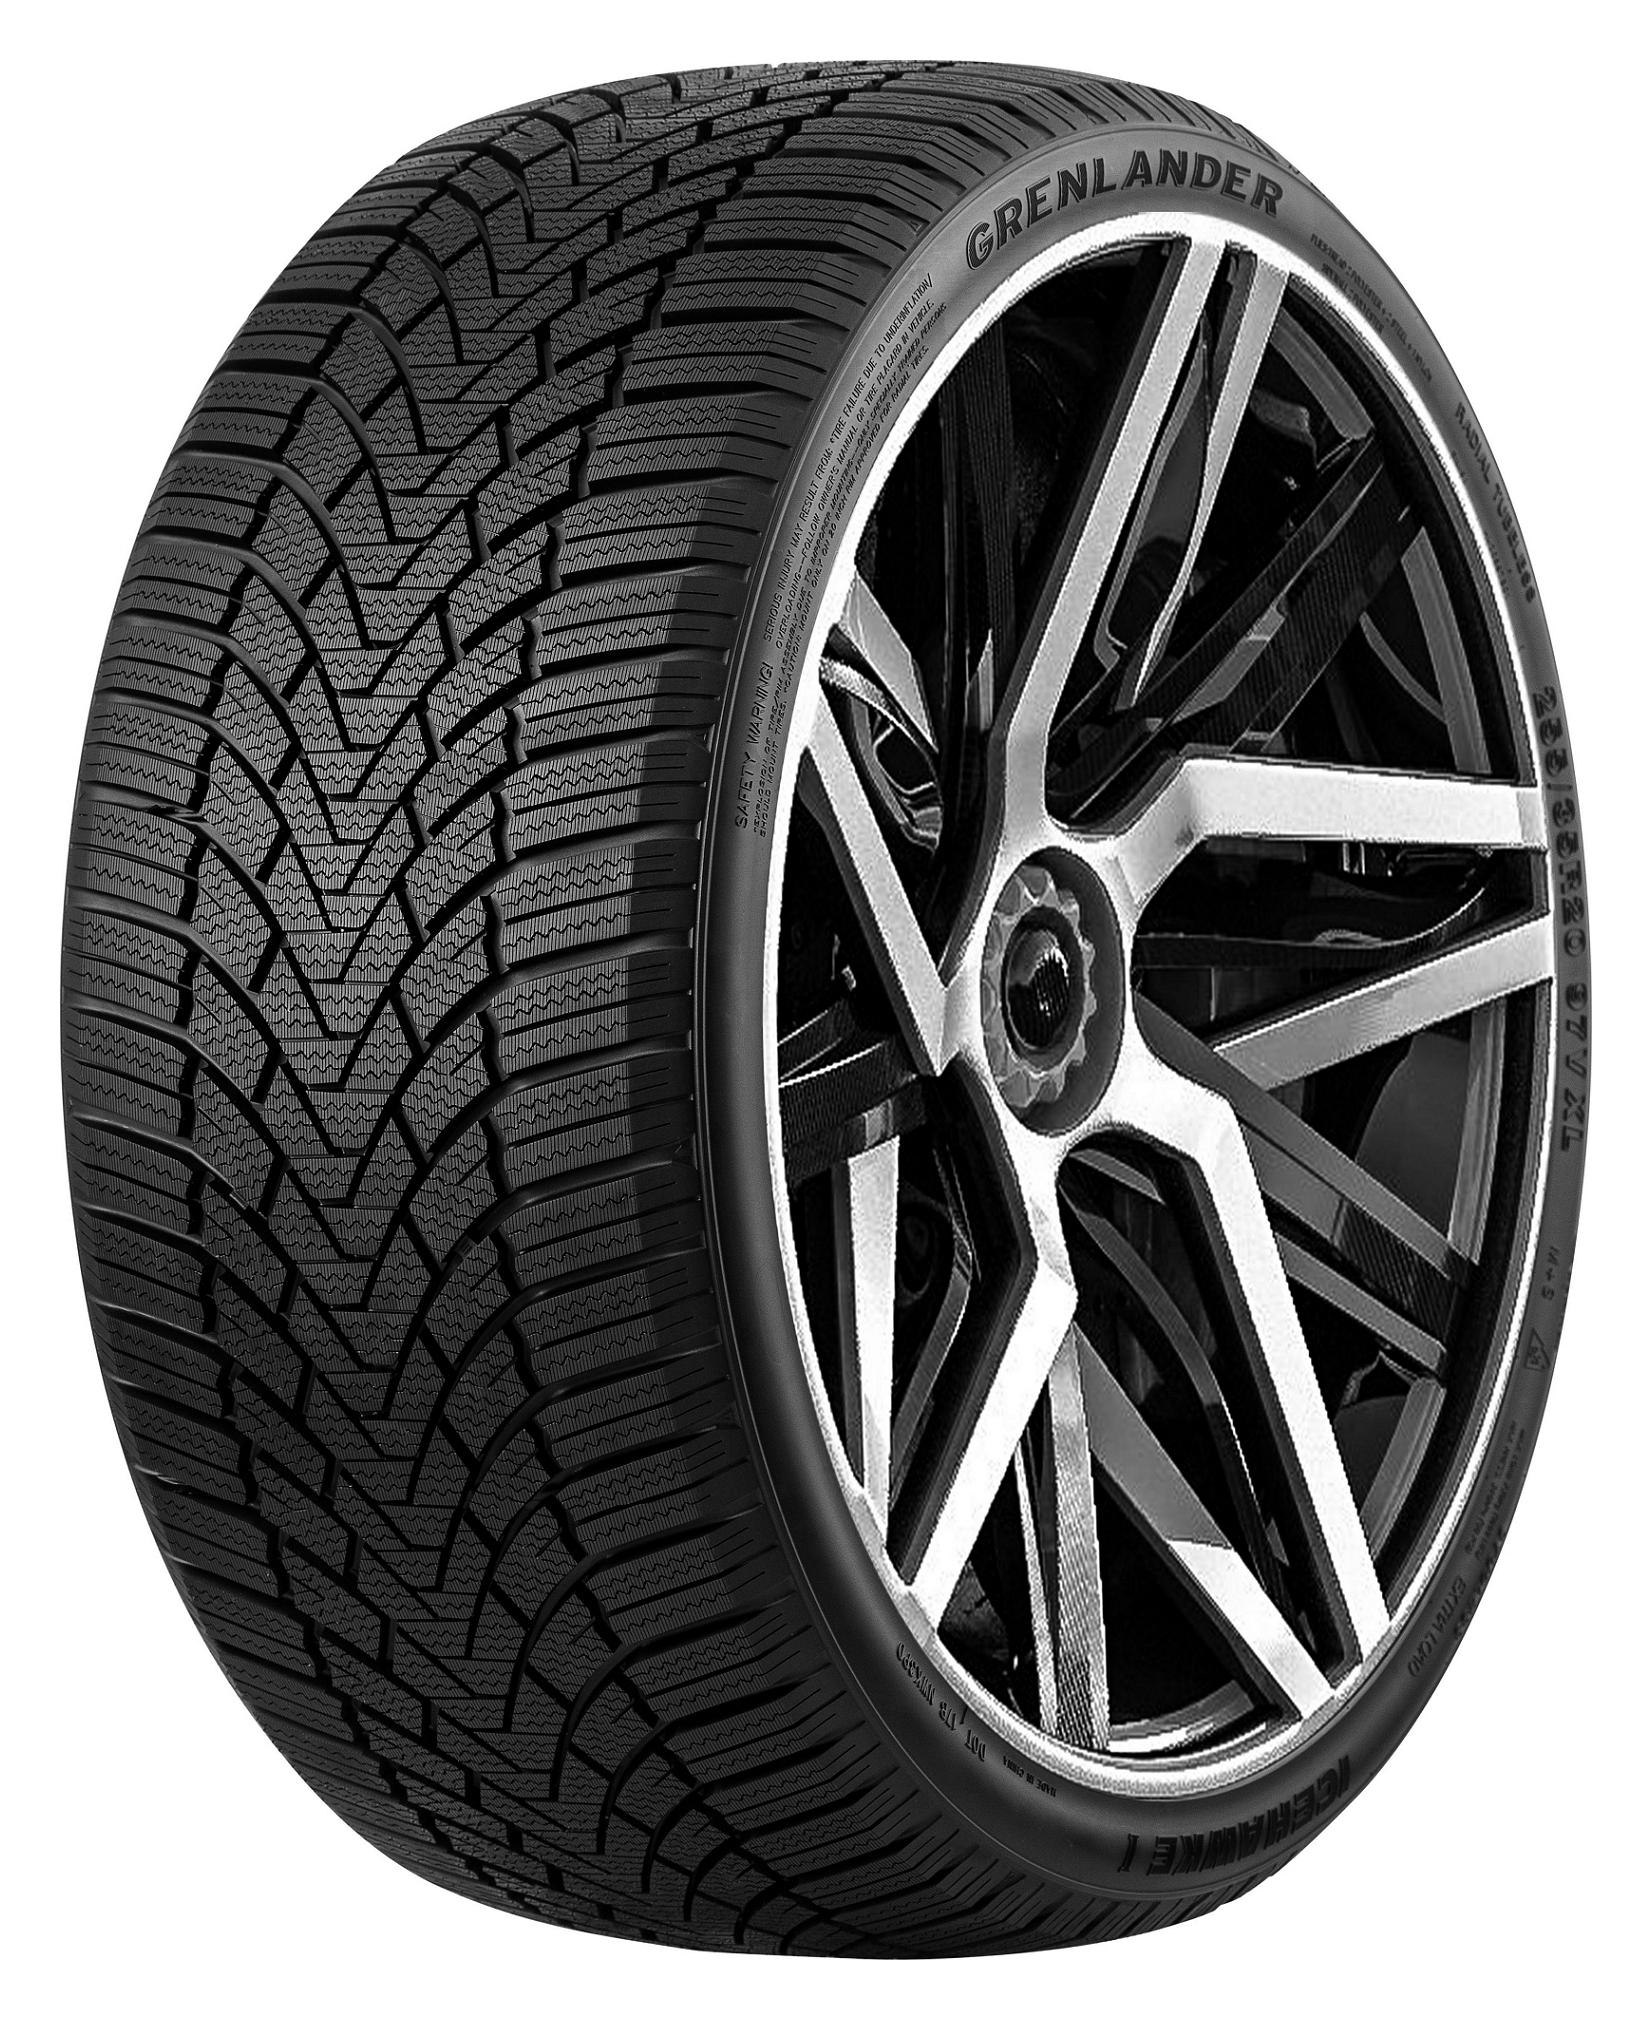 Gomme Nuove Grenlander 165/60 R15 81H ICEHAWKE 1 XL M+S pneumatici nuovi Invernale